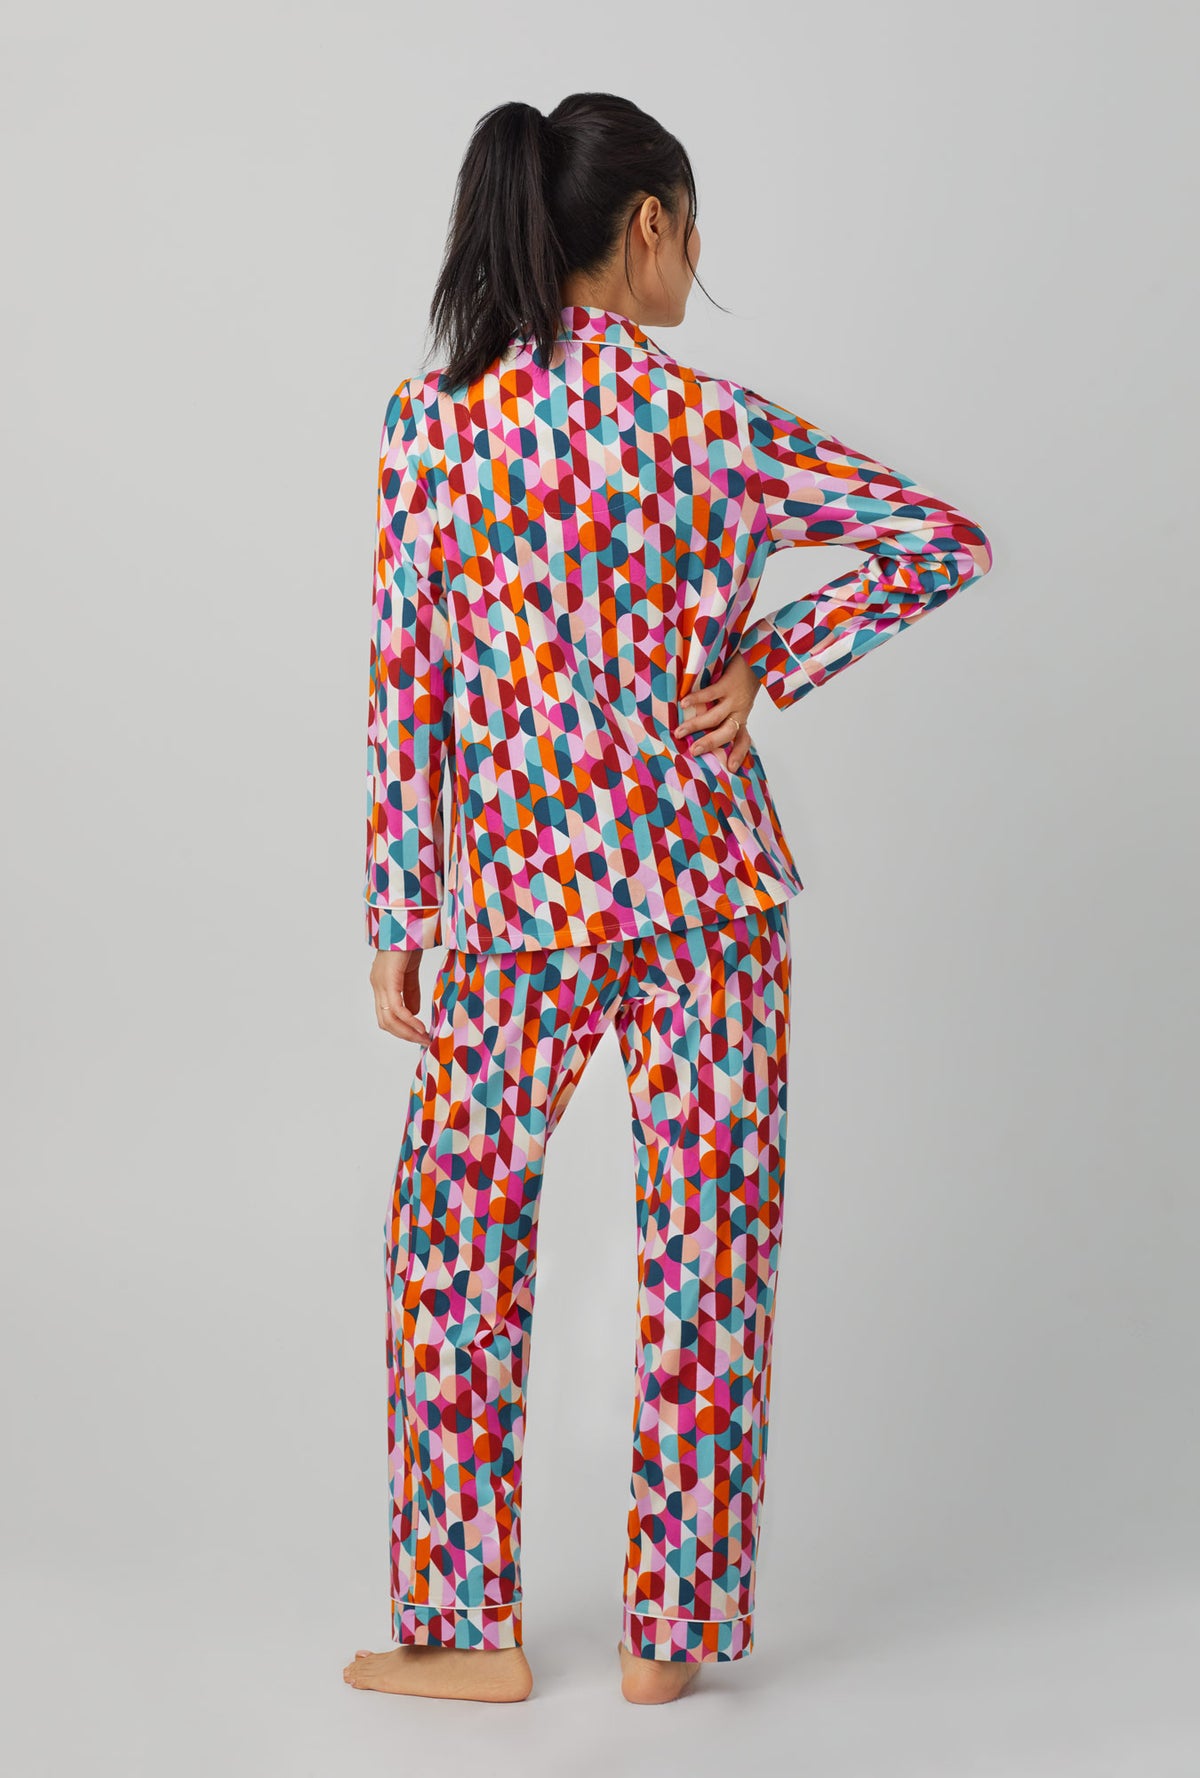 A lady wearing Long Sleeve Classic Stretch Jersey PJ Set with dancing dots print